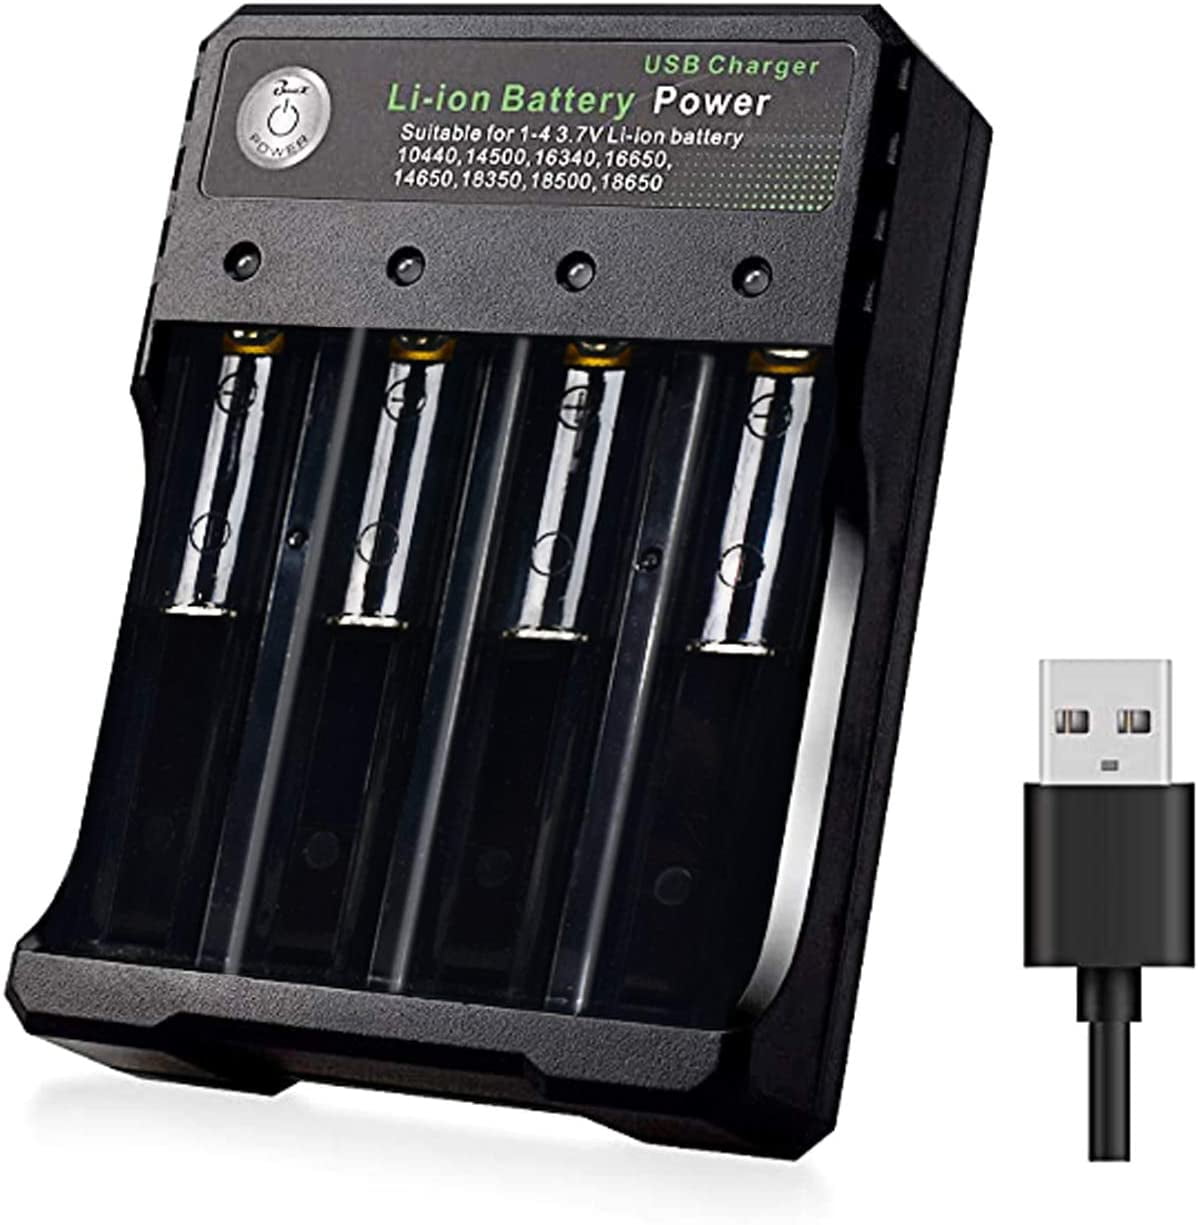 Universal 4 Slot Battery Charger For 18650 16340 14500 Rechargeable Battery USA 